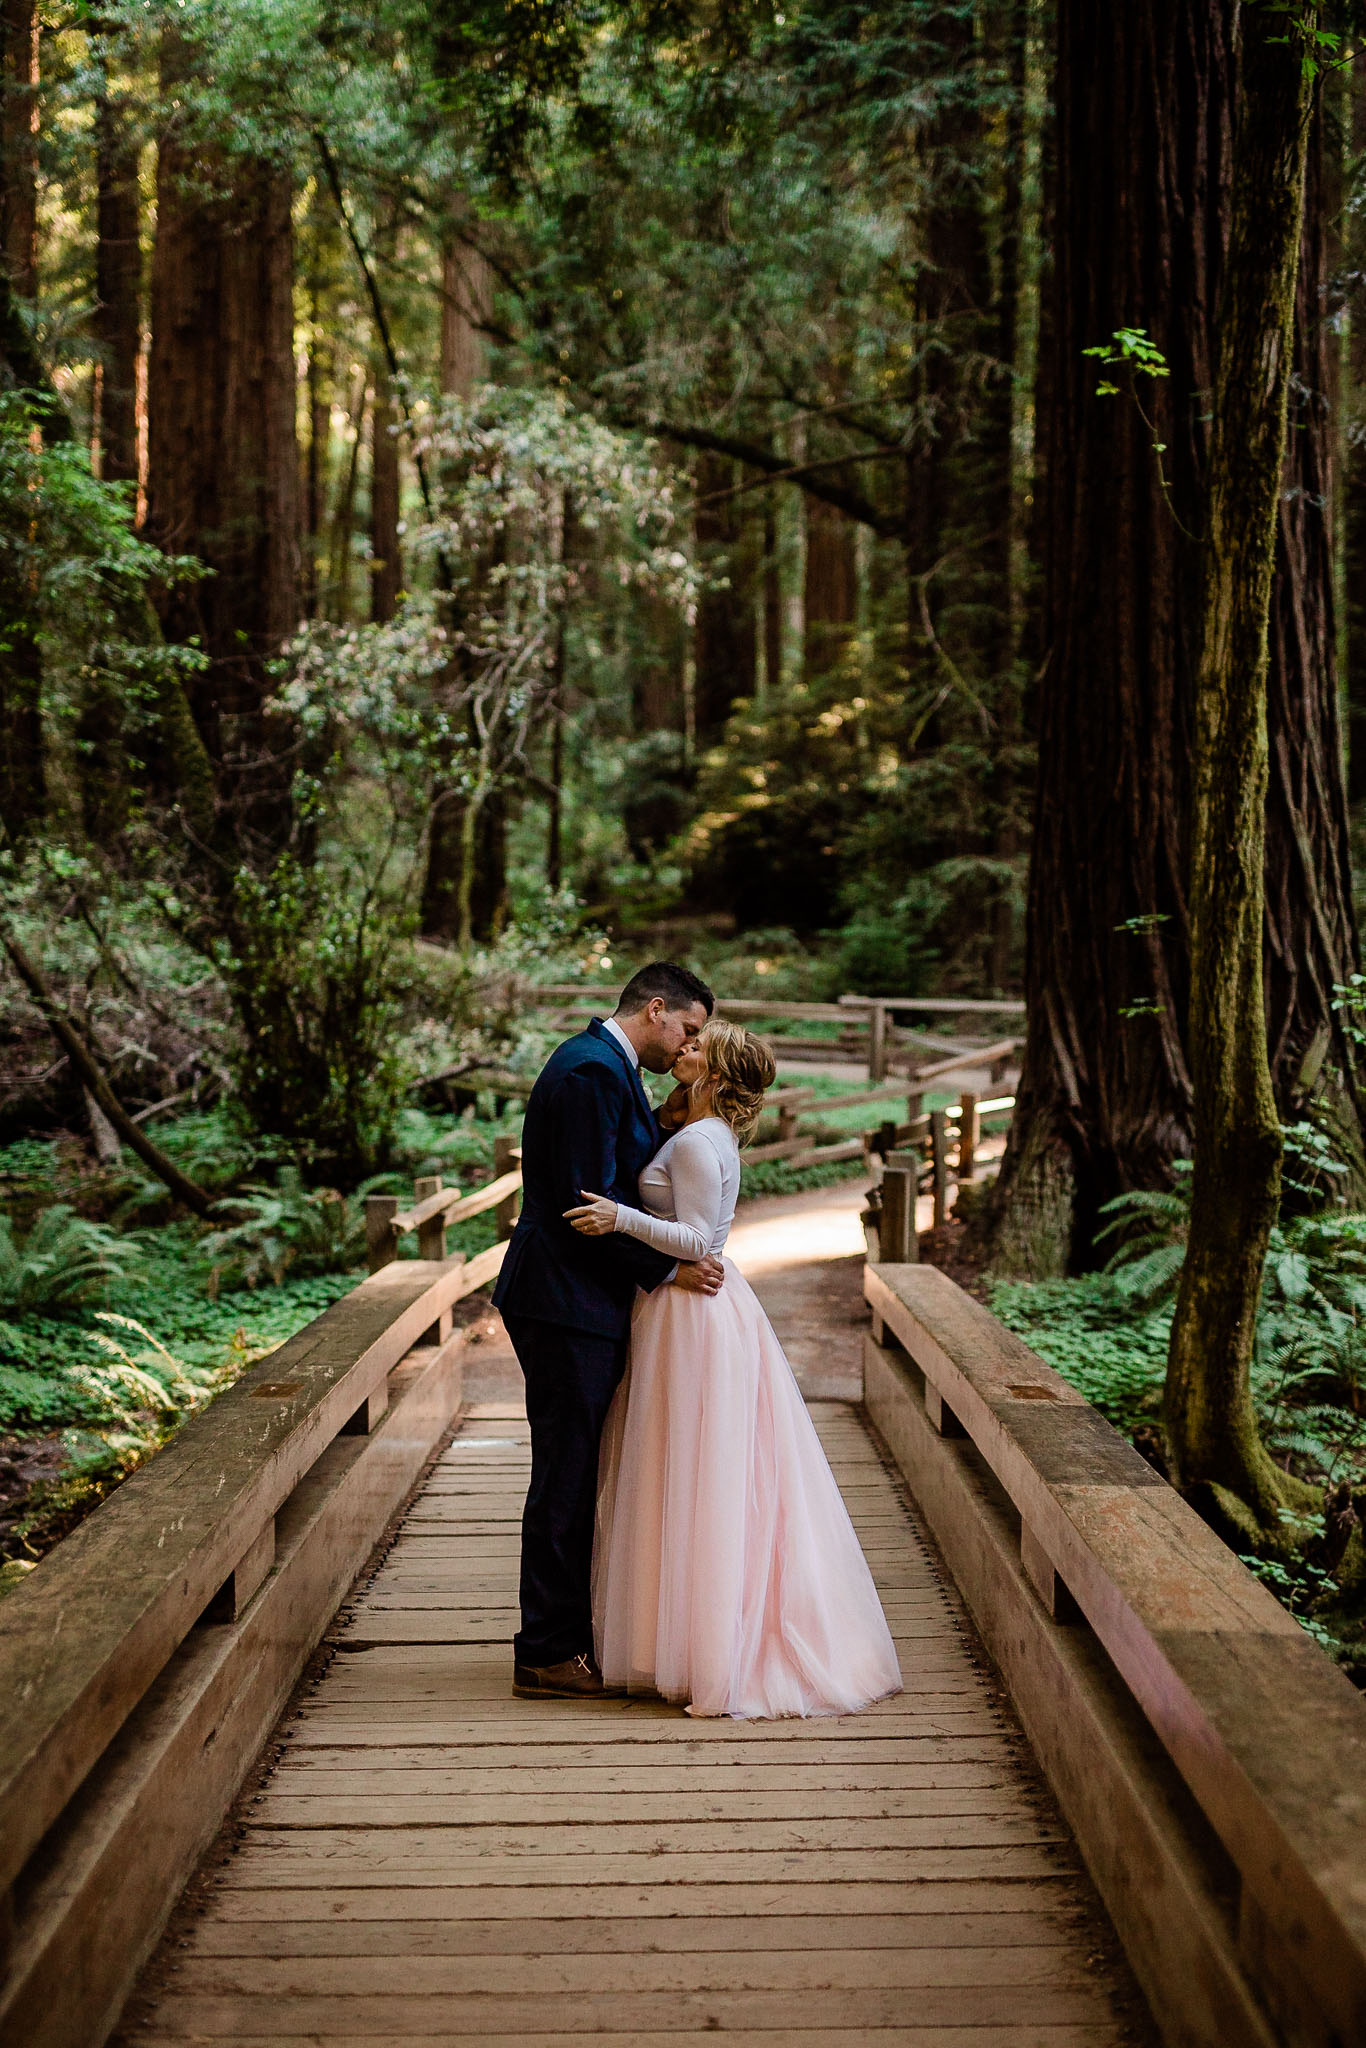 Bride and Groom pose for wedding photos in the Muir Woods National Monument